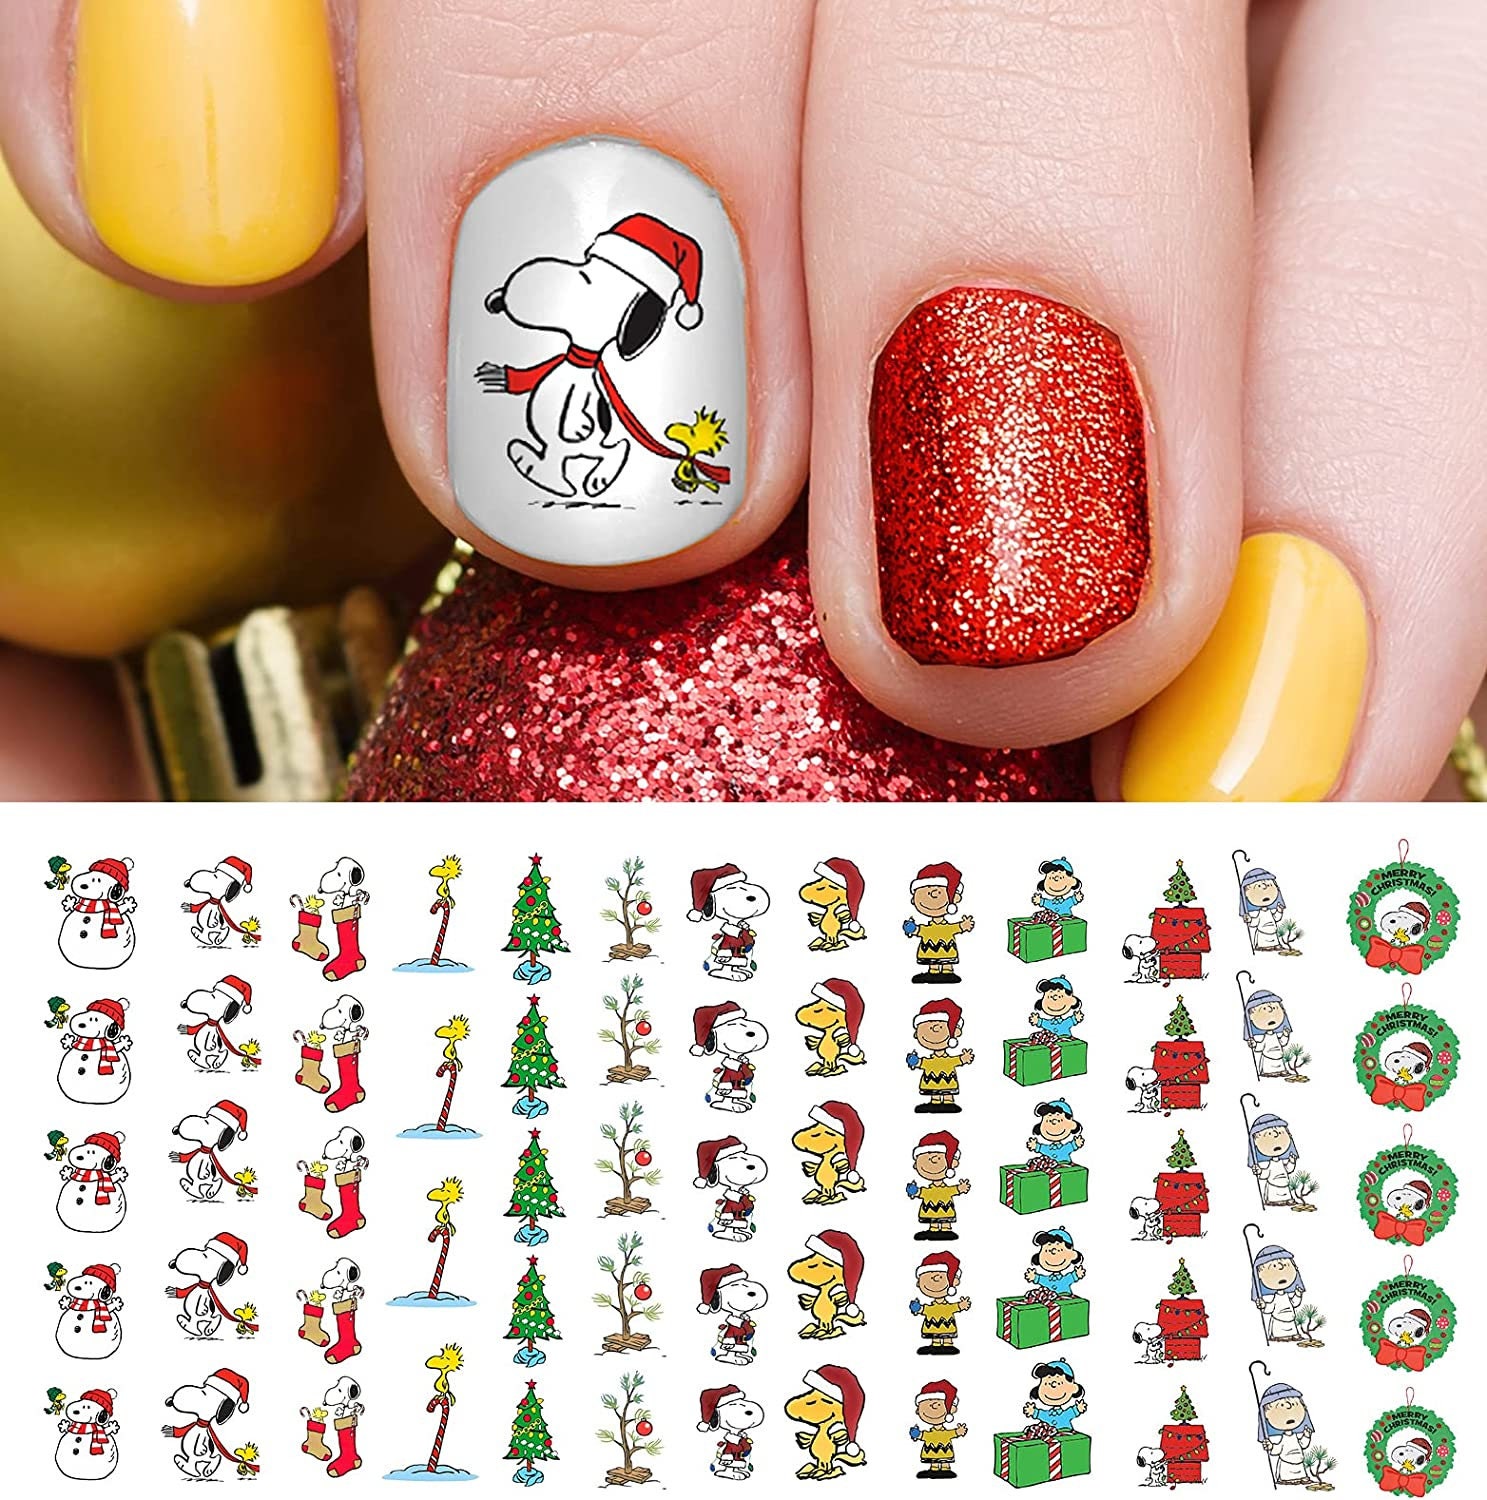 Holiday Christmas - Christmas Grinch #1 Grinch Ornament Smile Green Face  Nail Decals - WaterSlide Nail Art Decals Salon Quality DIY Manicure Nail